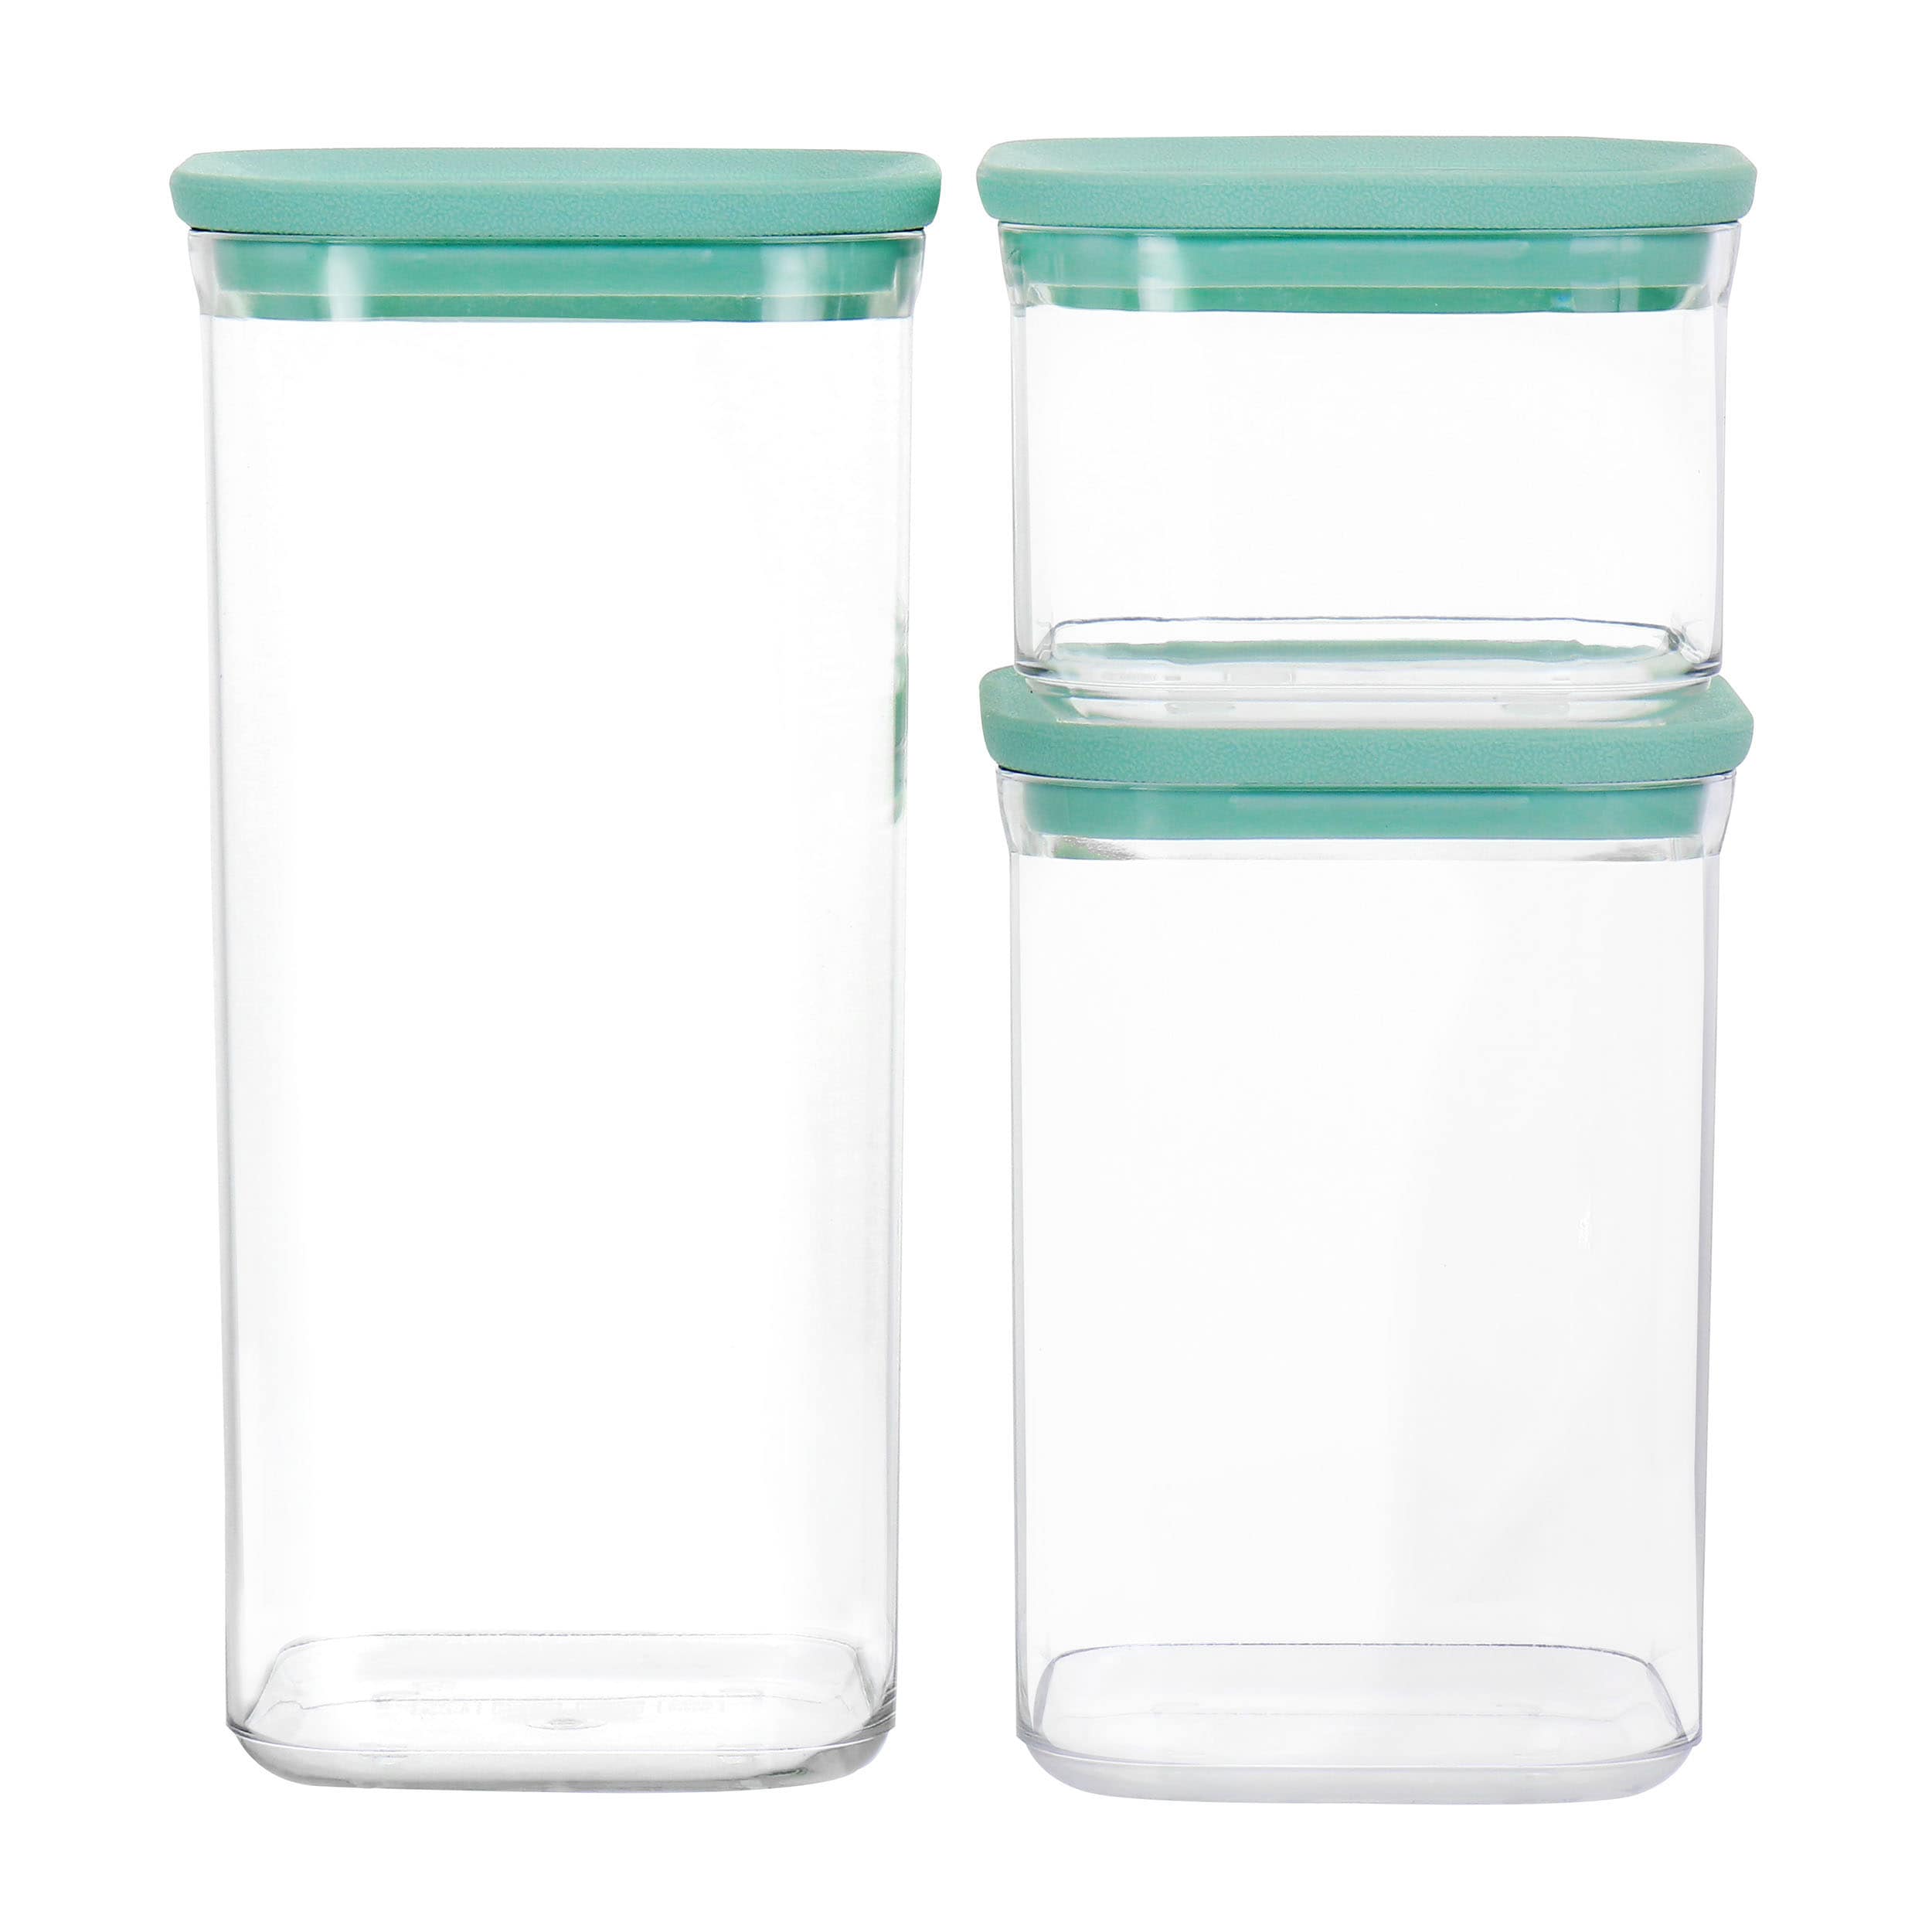 50 pack, 17oz] Food Storage Containers With Lids - Plastic